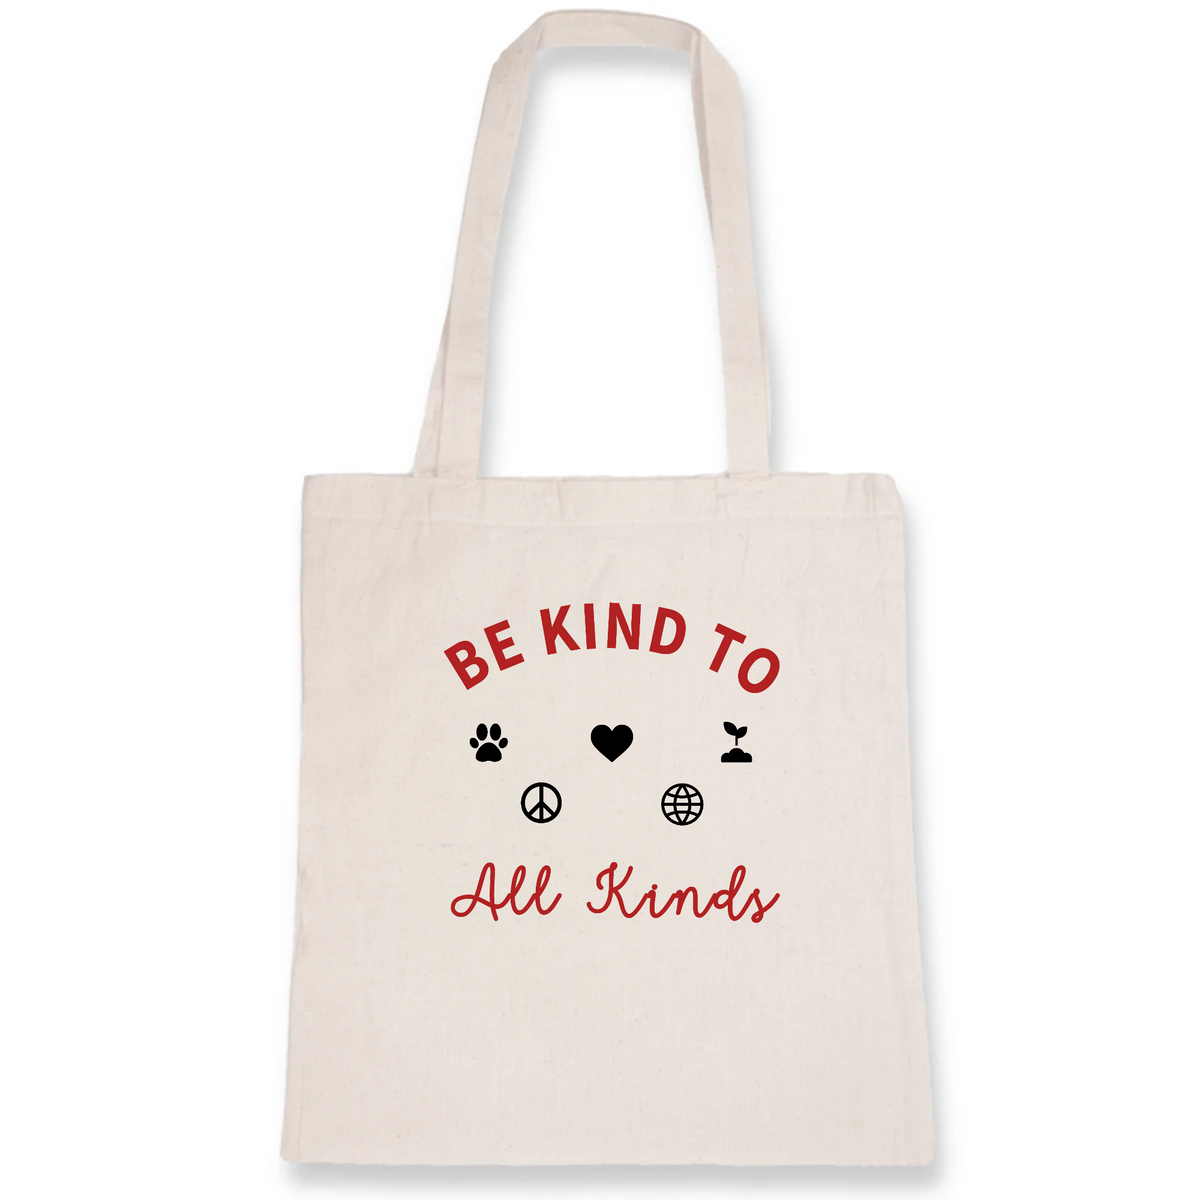 Be Kind to all Kinds - Organic Cotton Tote Bag – Oat Milk Club